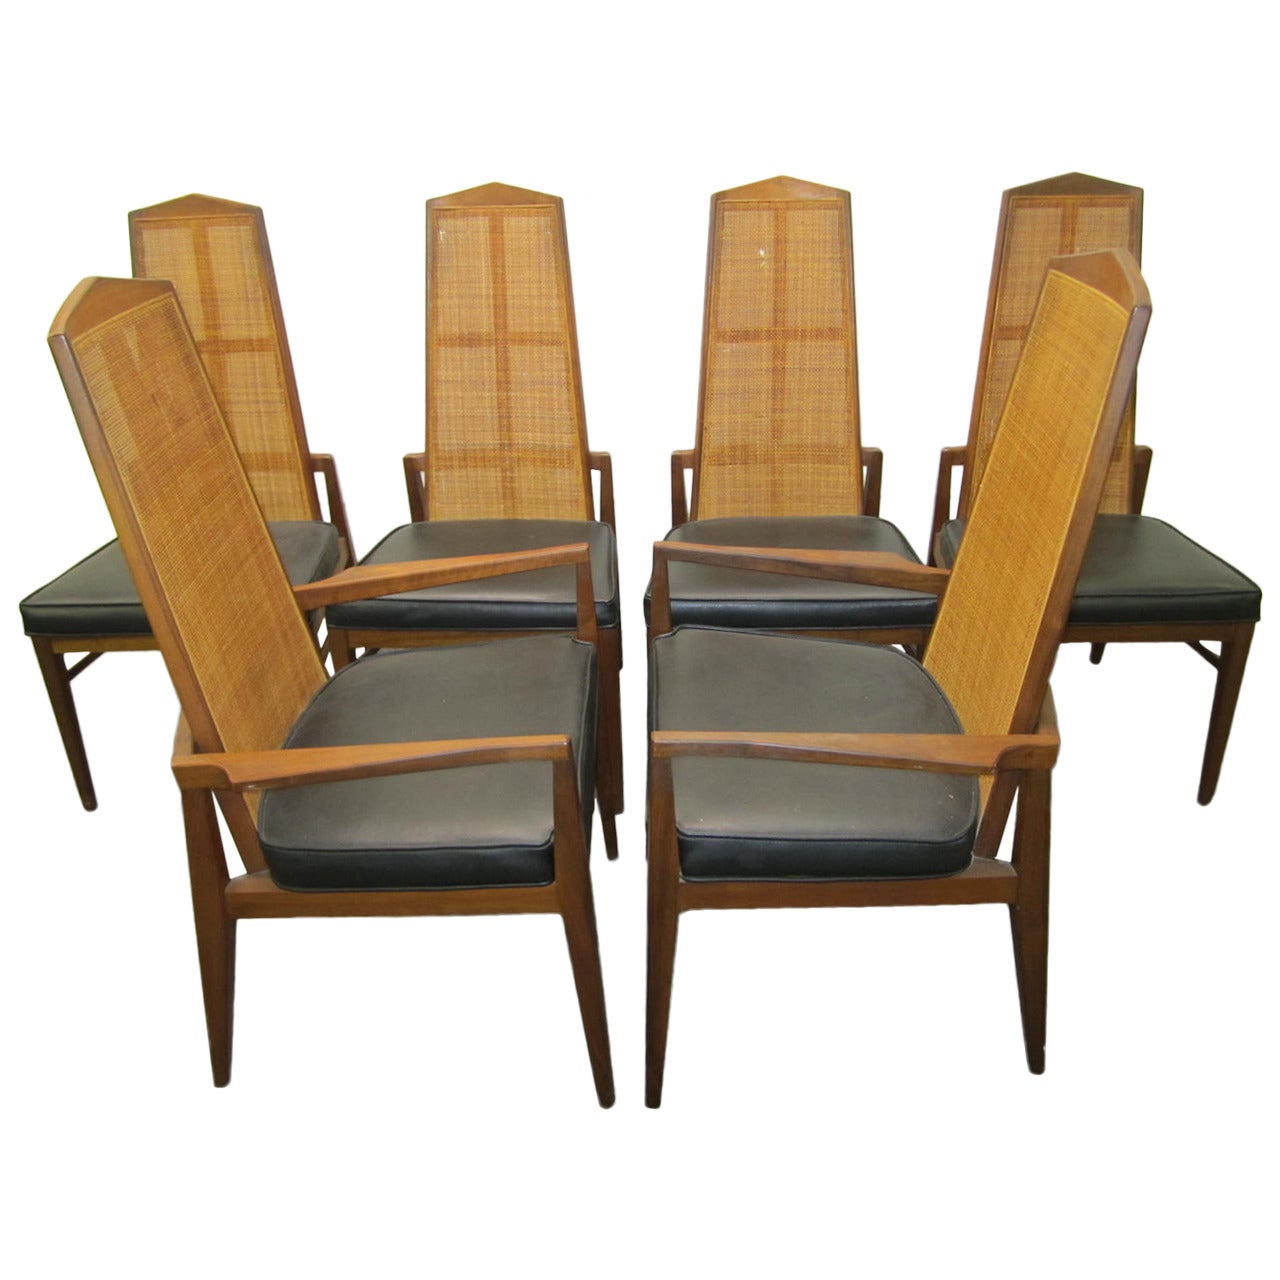 Six Walnut Foster and McDavid Cane Back Dining Chairs, Mid-Century Modern